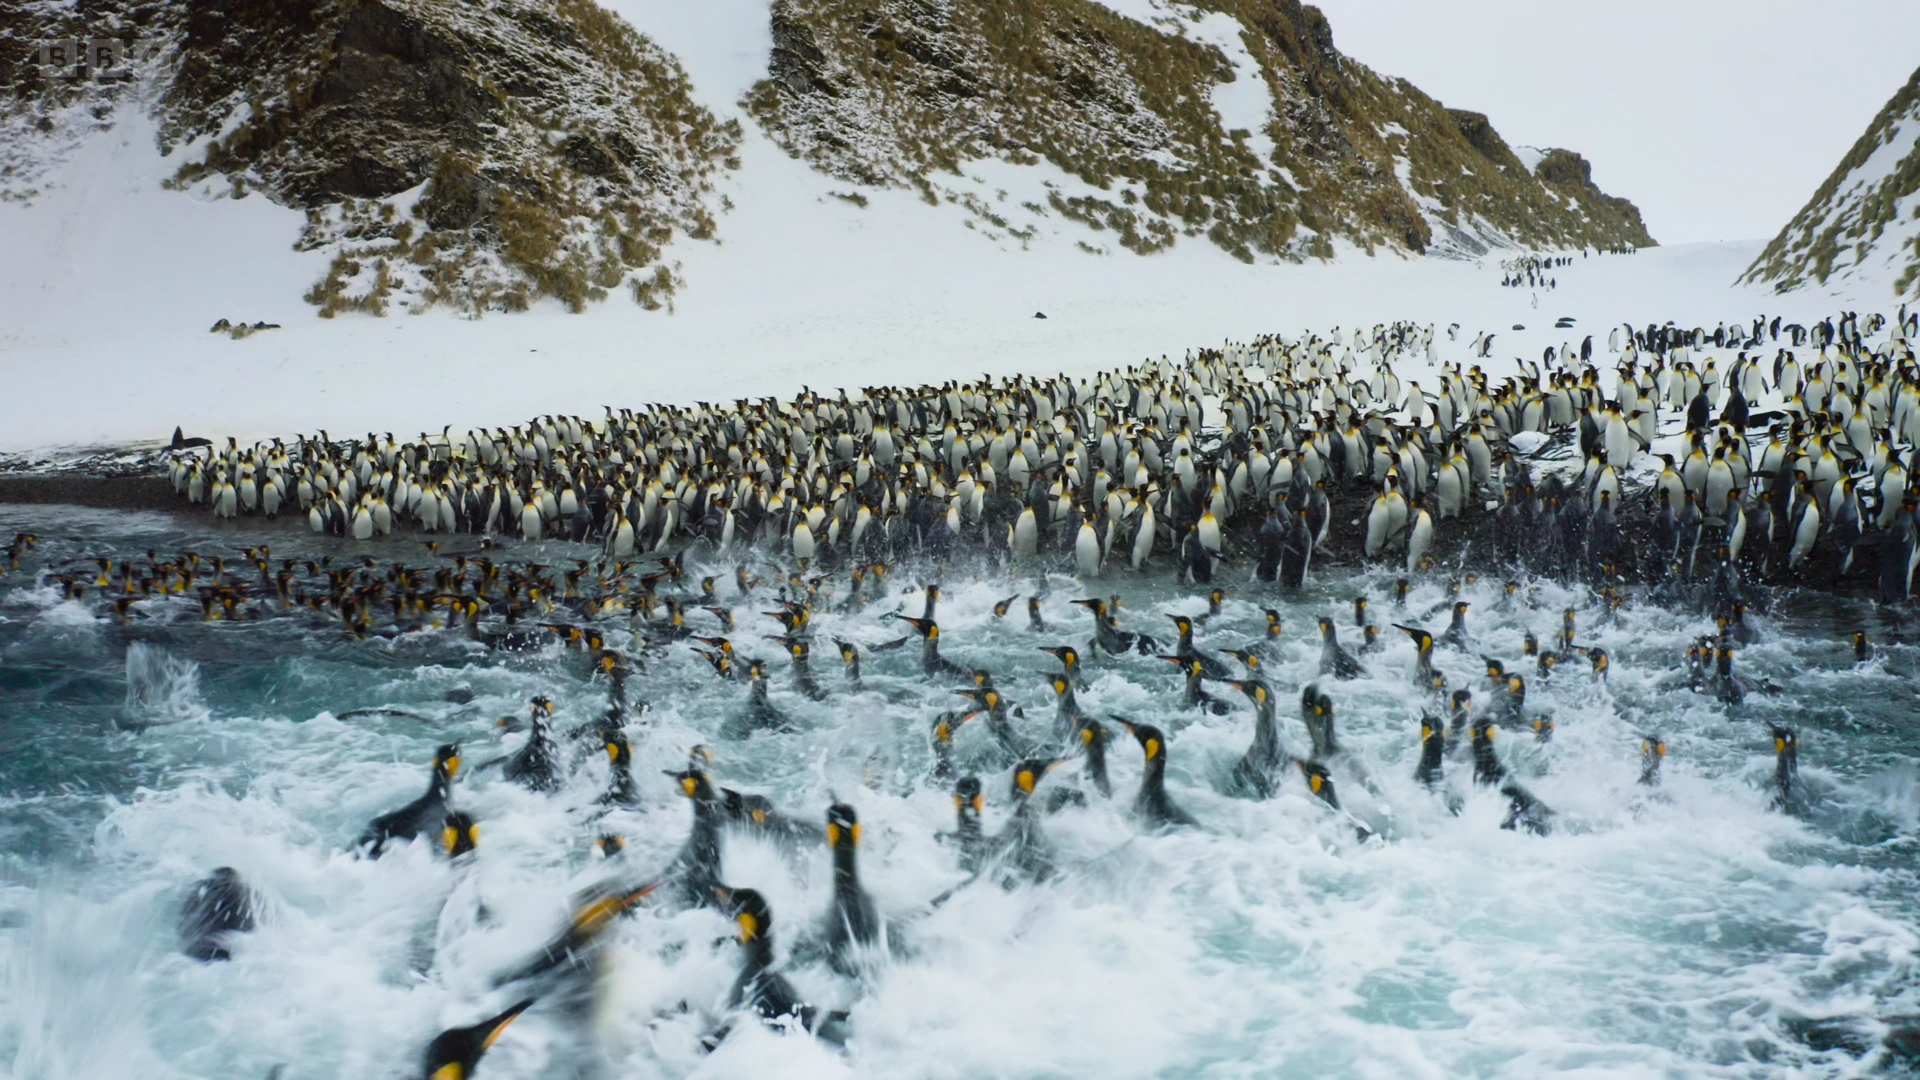 King penguin (Aptenodytes patagonicus patagonicus) as shown in Frozen Planet II - Frozen South